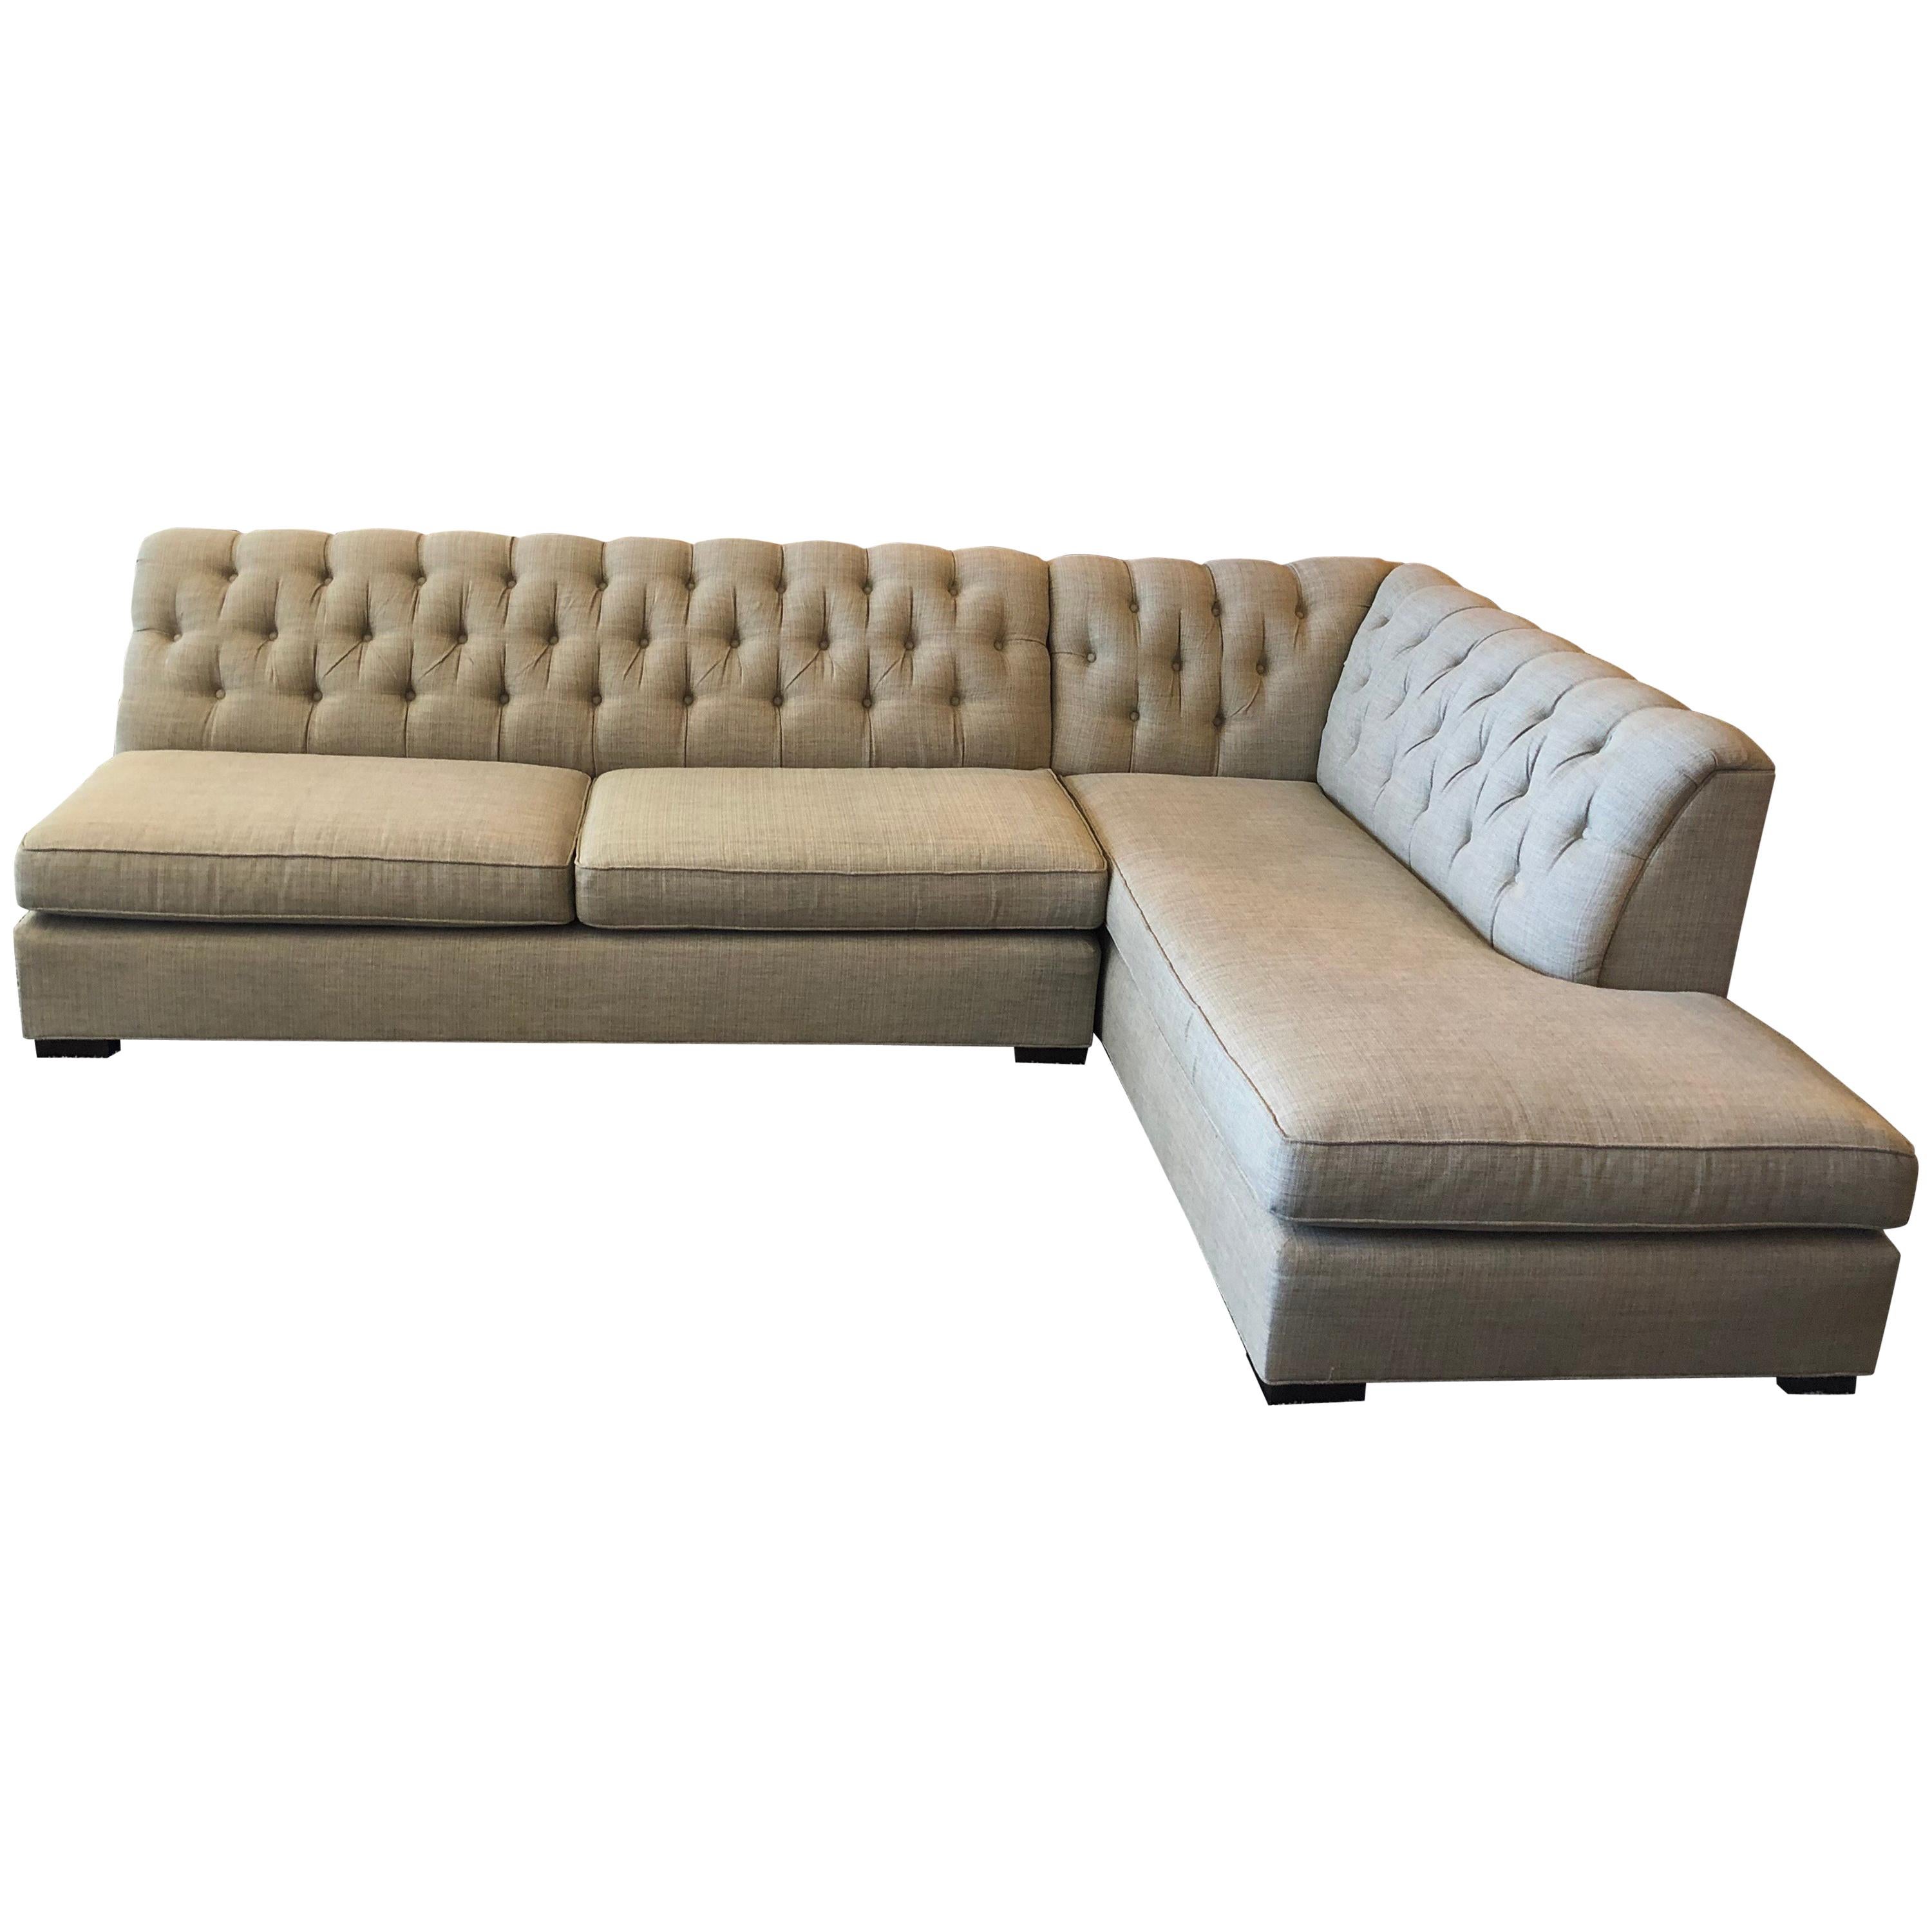 Mitchell-Gold Tufted Two-Piece Sectional Sofa For Sale